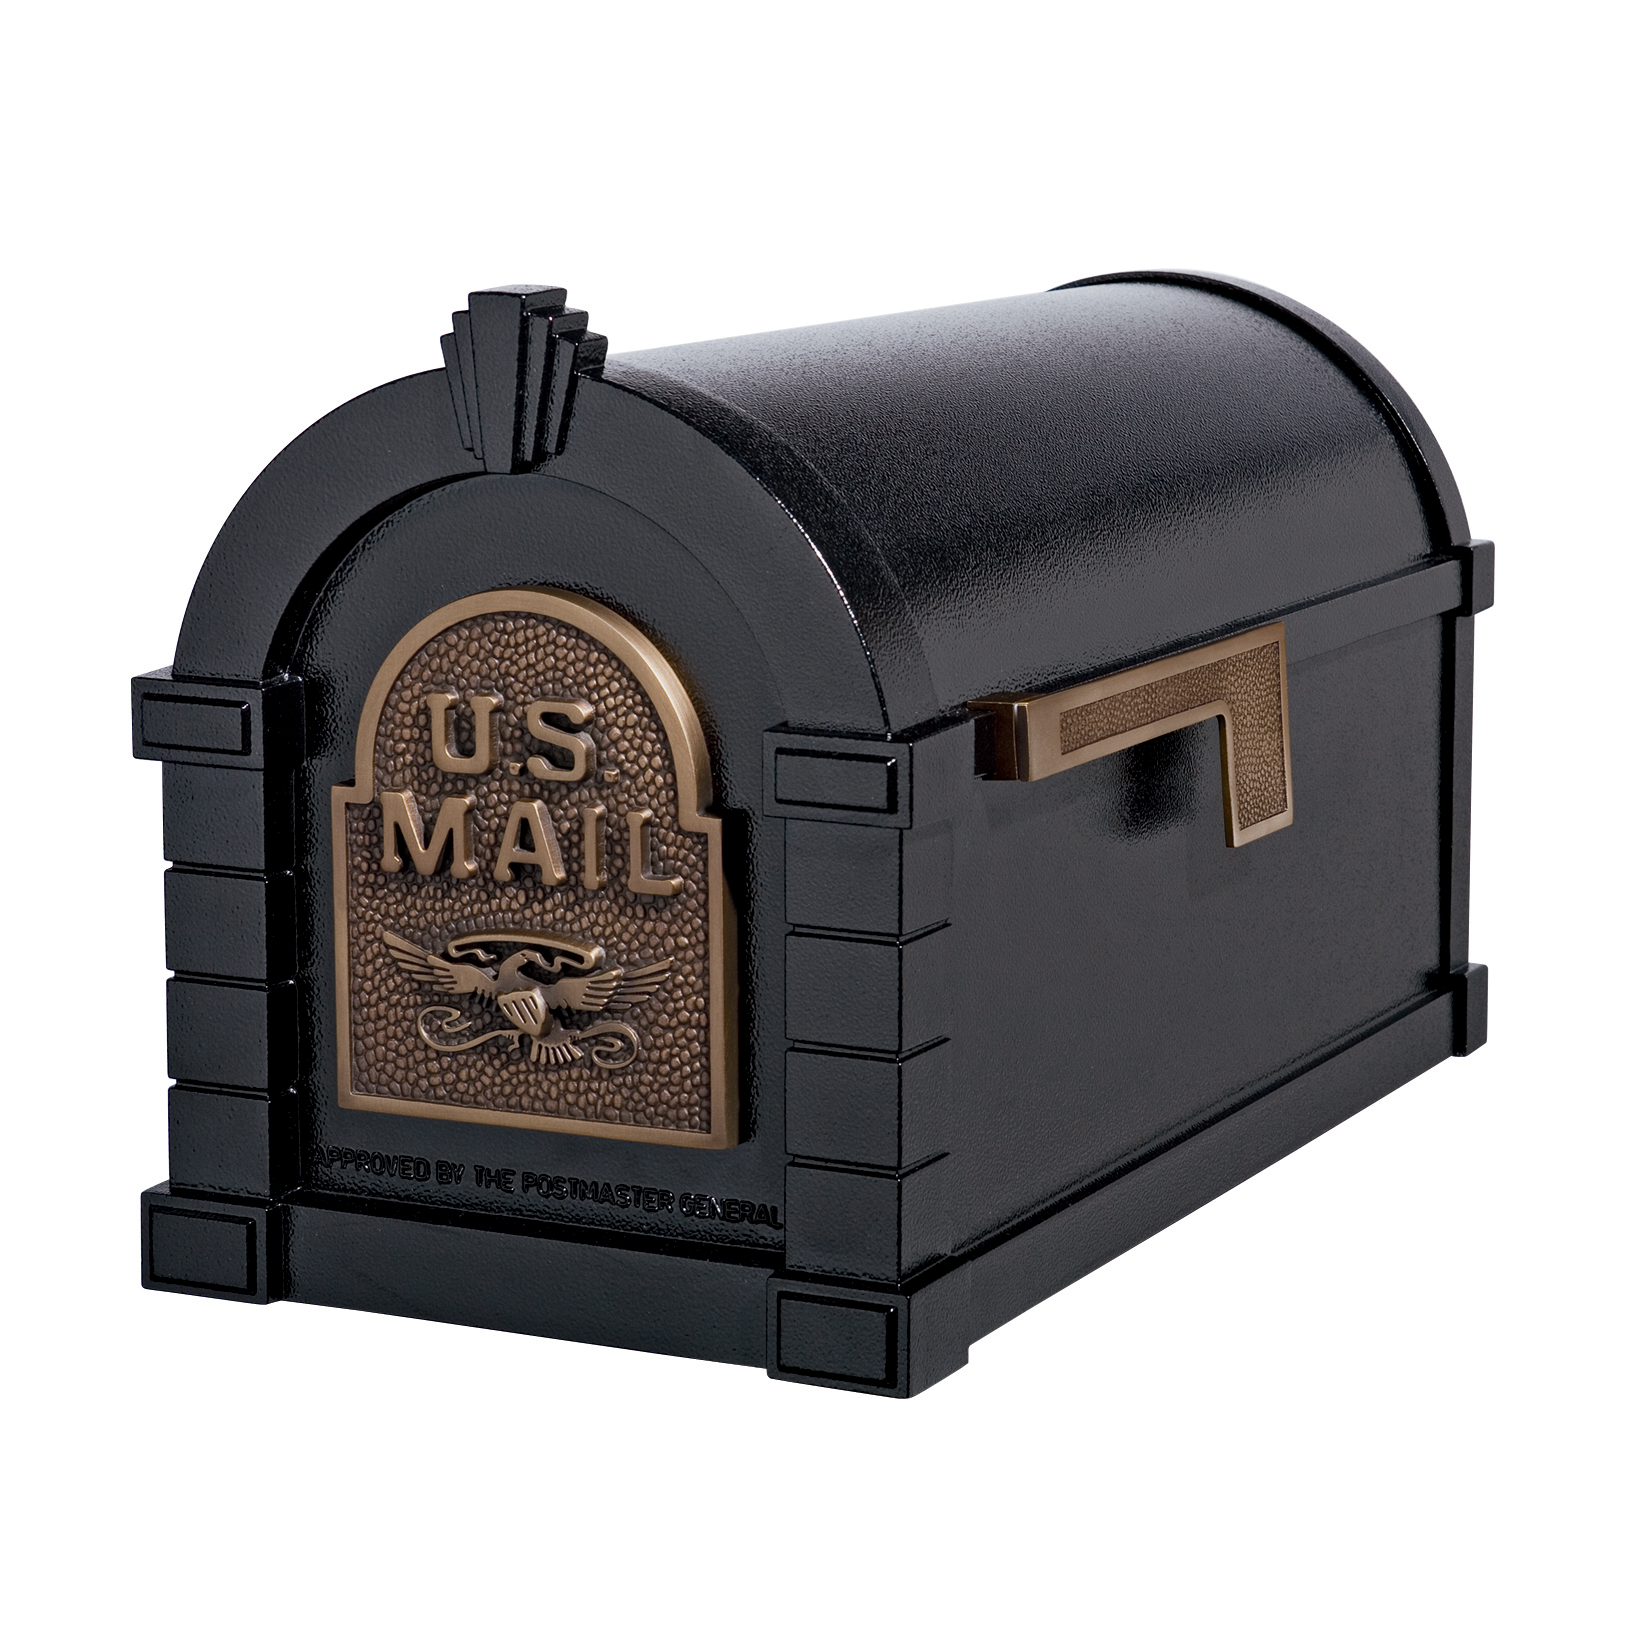 Gaines Eagle Keystone Mailboxes<br >Black with Antique Bronze